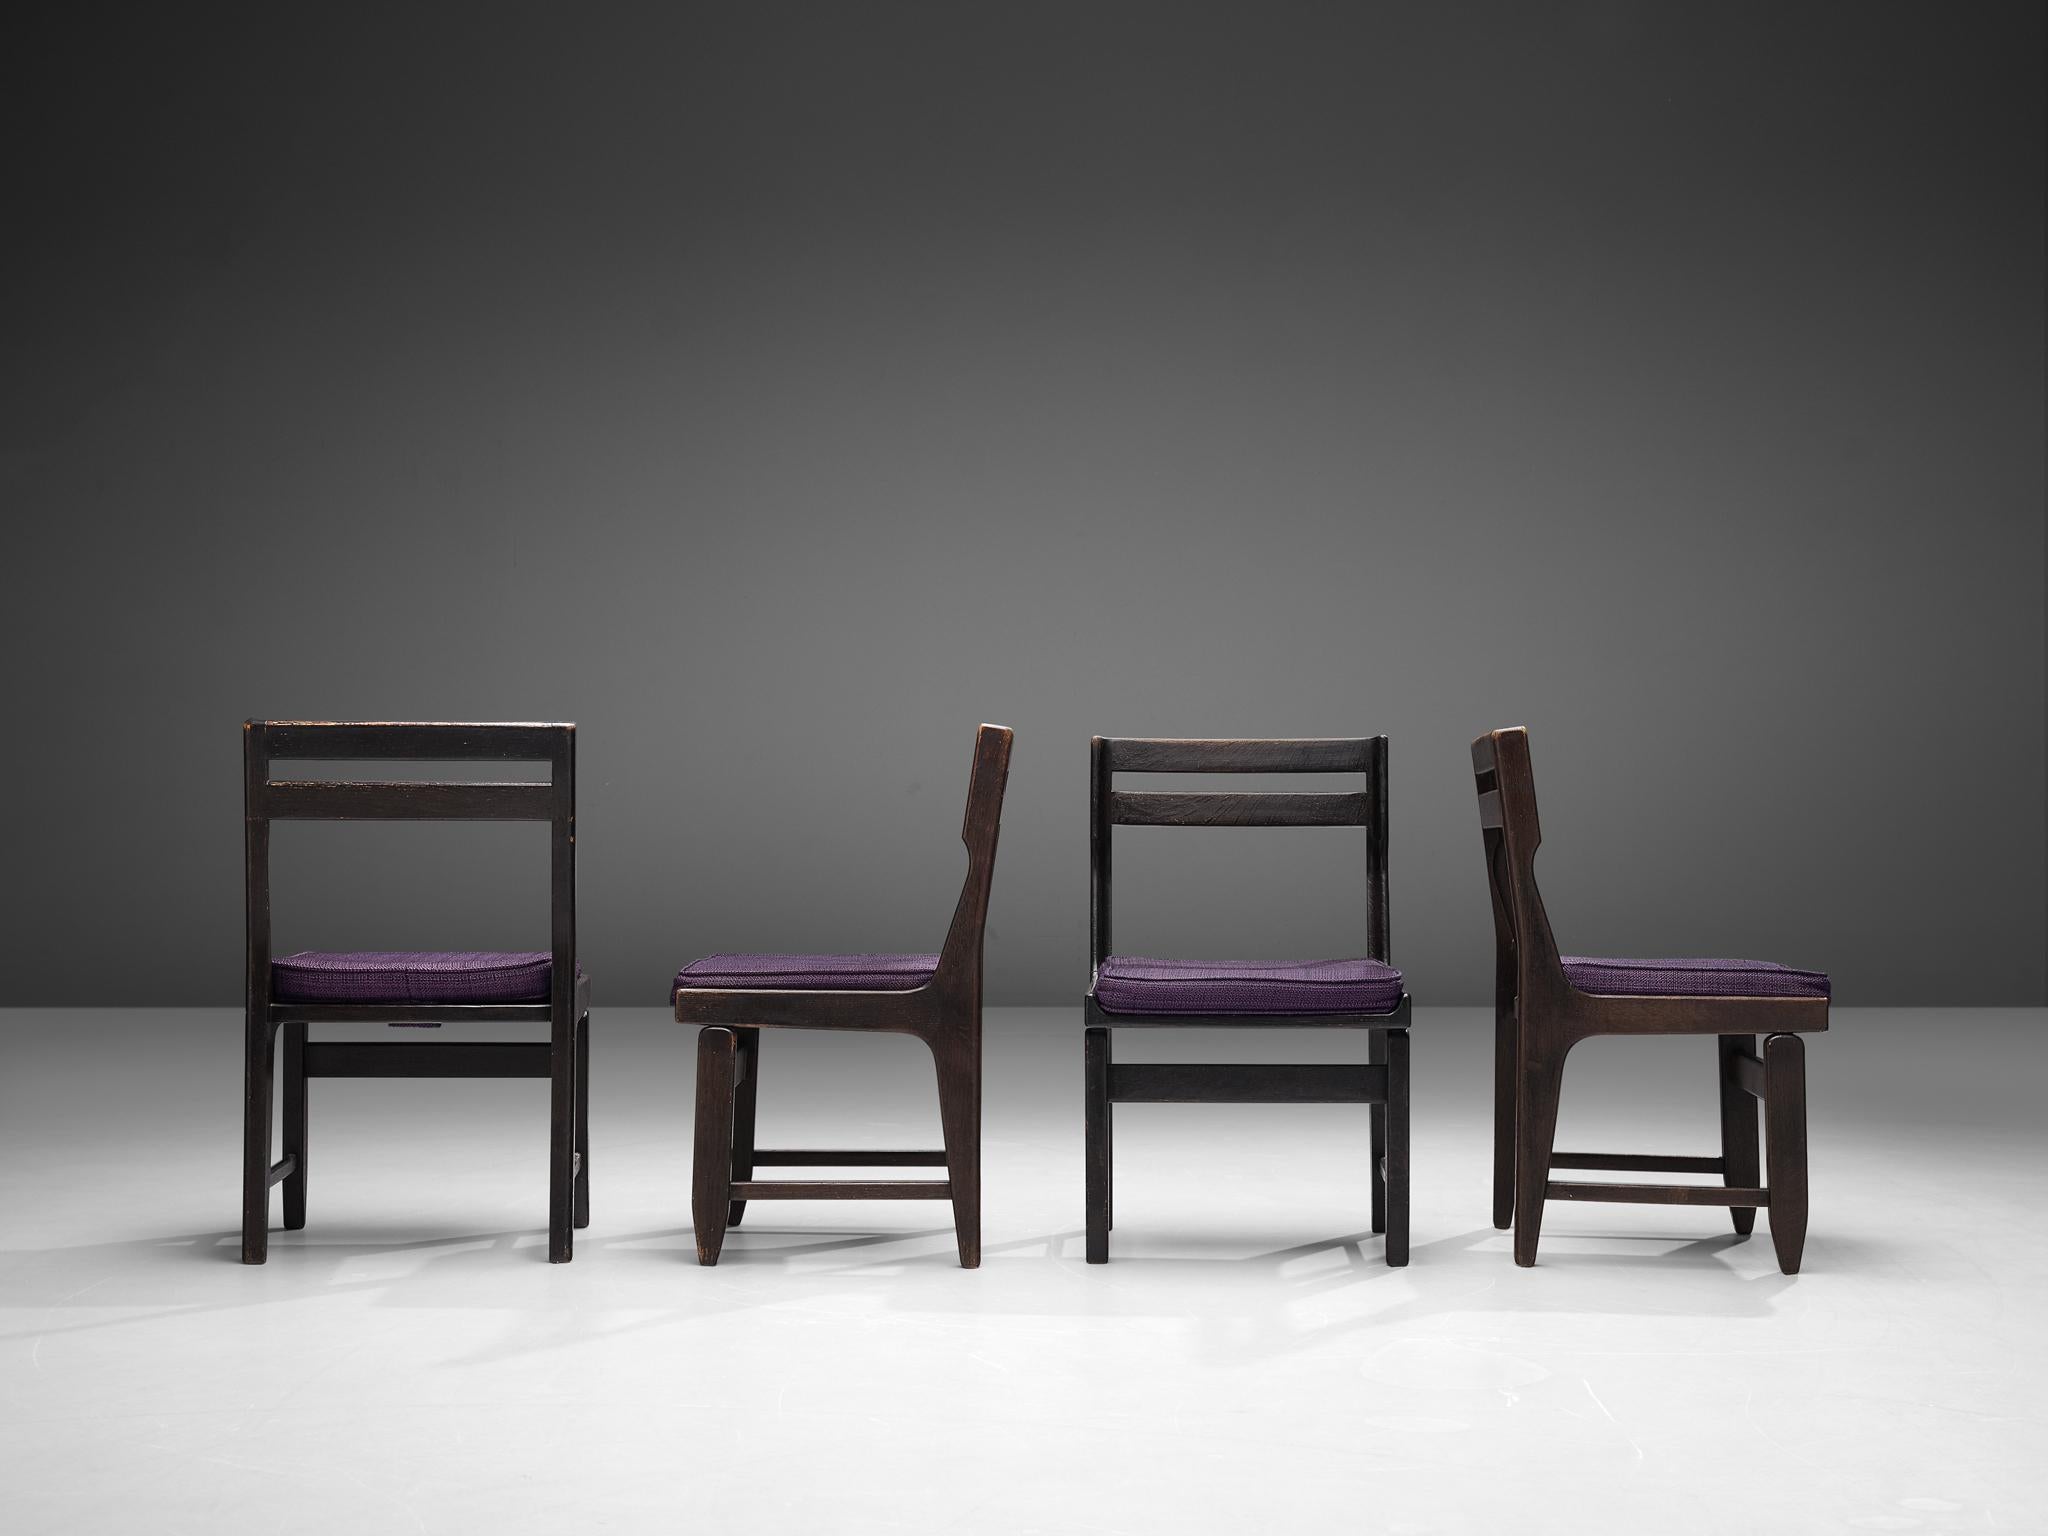 Guillerme et Chambron for Votre Maison, set of four dining chairs, darkened oak, fabric upholstery, France, 1960s

This set of four dining chairs shows the characteristic of the French designer duo Guillerme et Chambron. Using darkened oak to form a